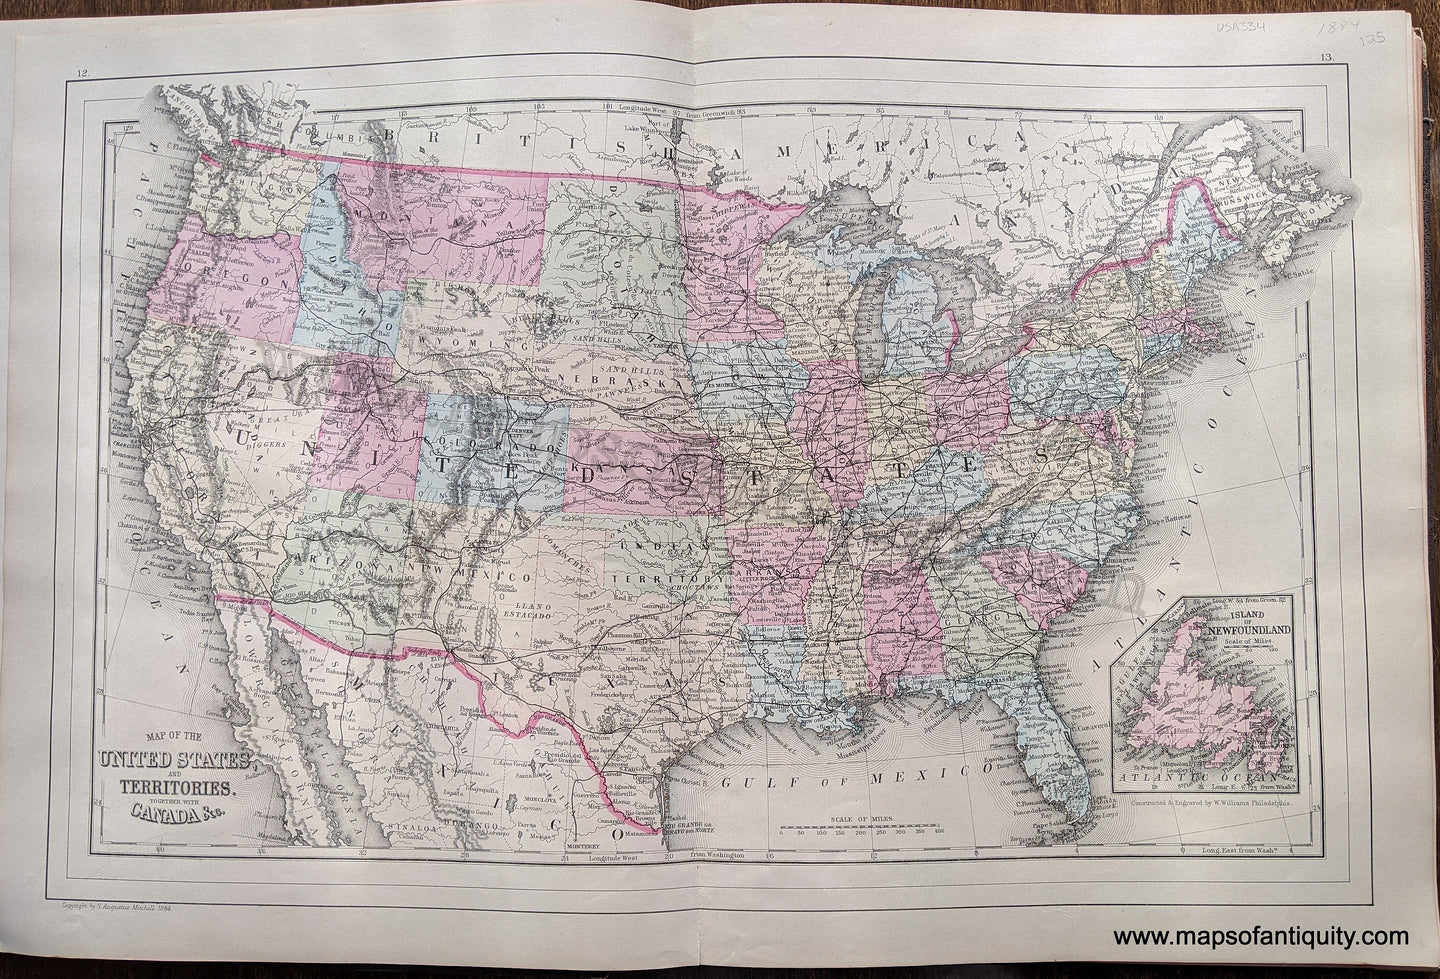 Antique-Hand-Colored-Map-Map-of-the-United-States-and-Territories.-Together-with-Canada-&c.-United-States--1884-Mitchell-Maps-Of-Antiquity-1800s-19th-century